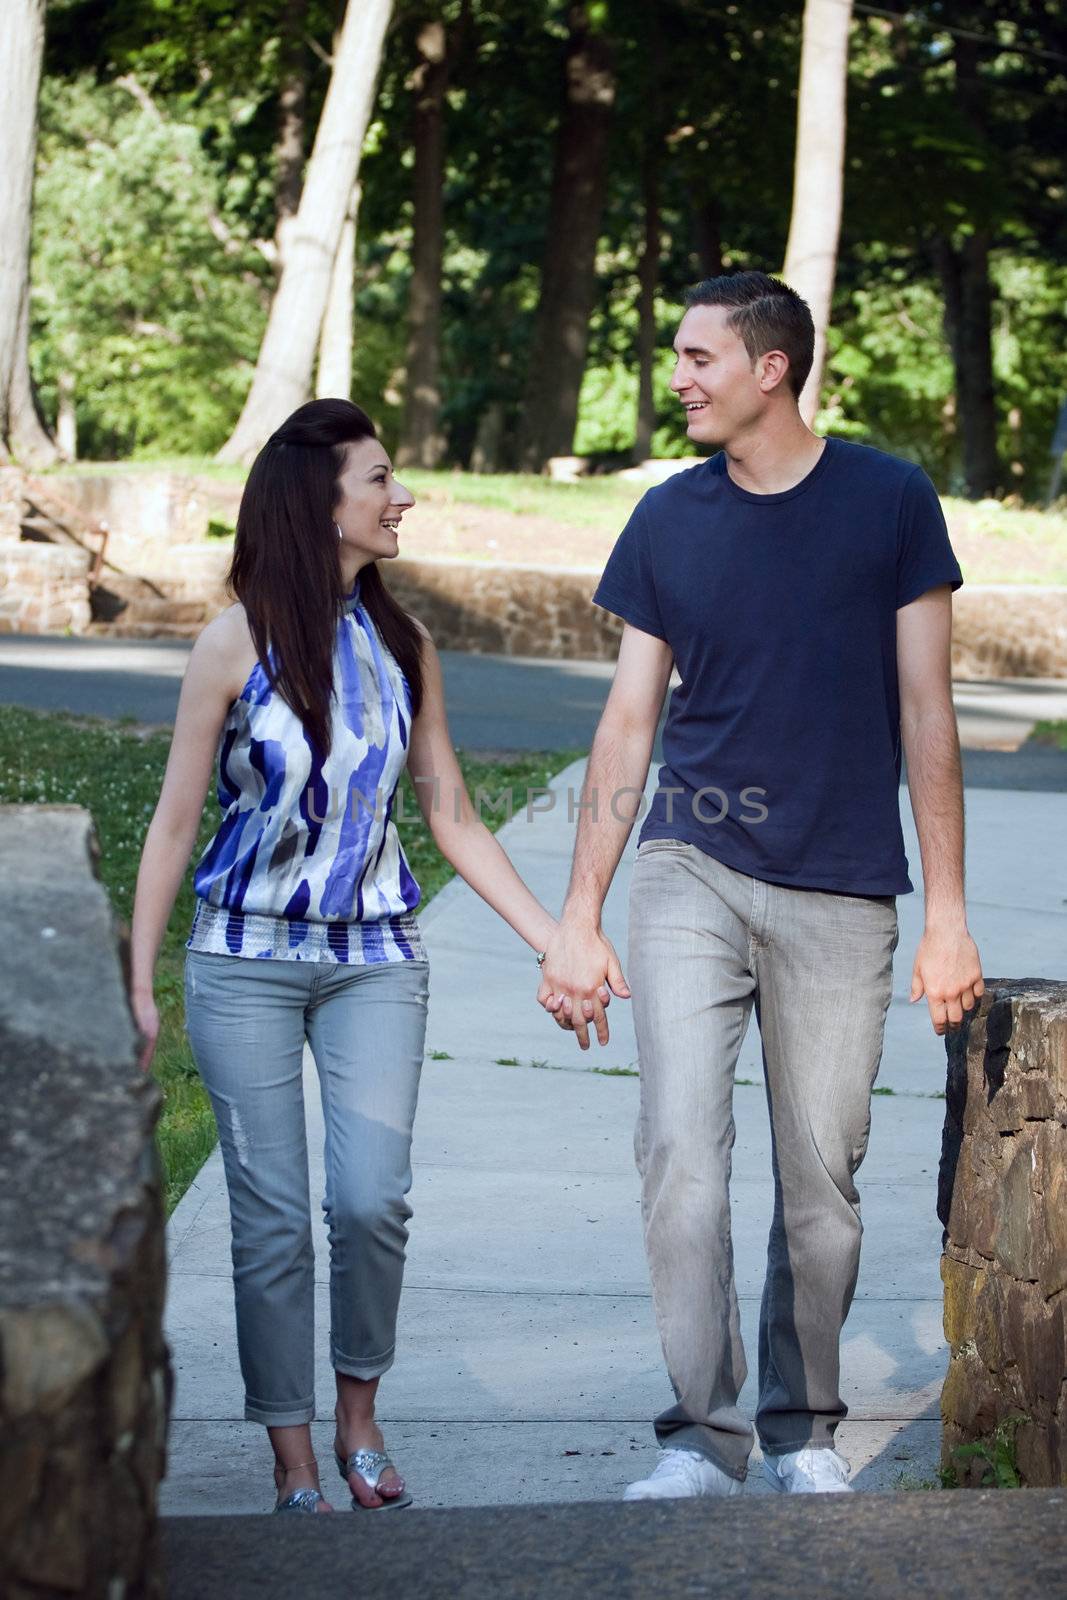 A happy young couple in their mid twenties smiling at each other during a walk through the park.